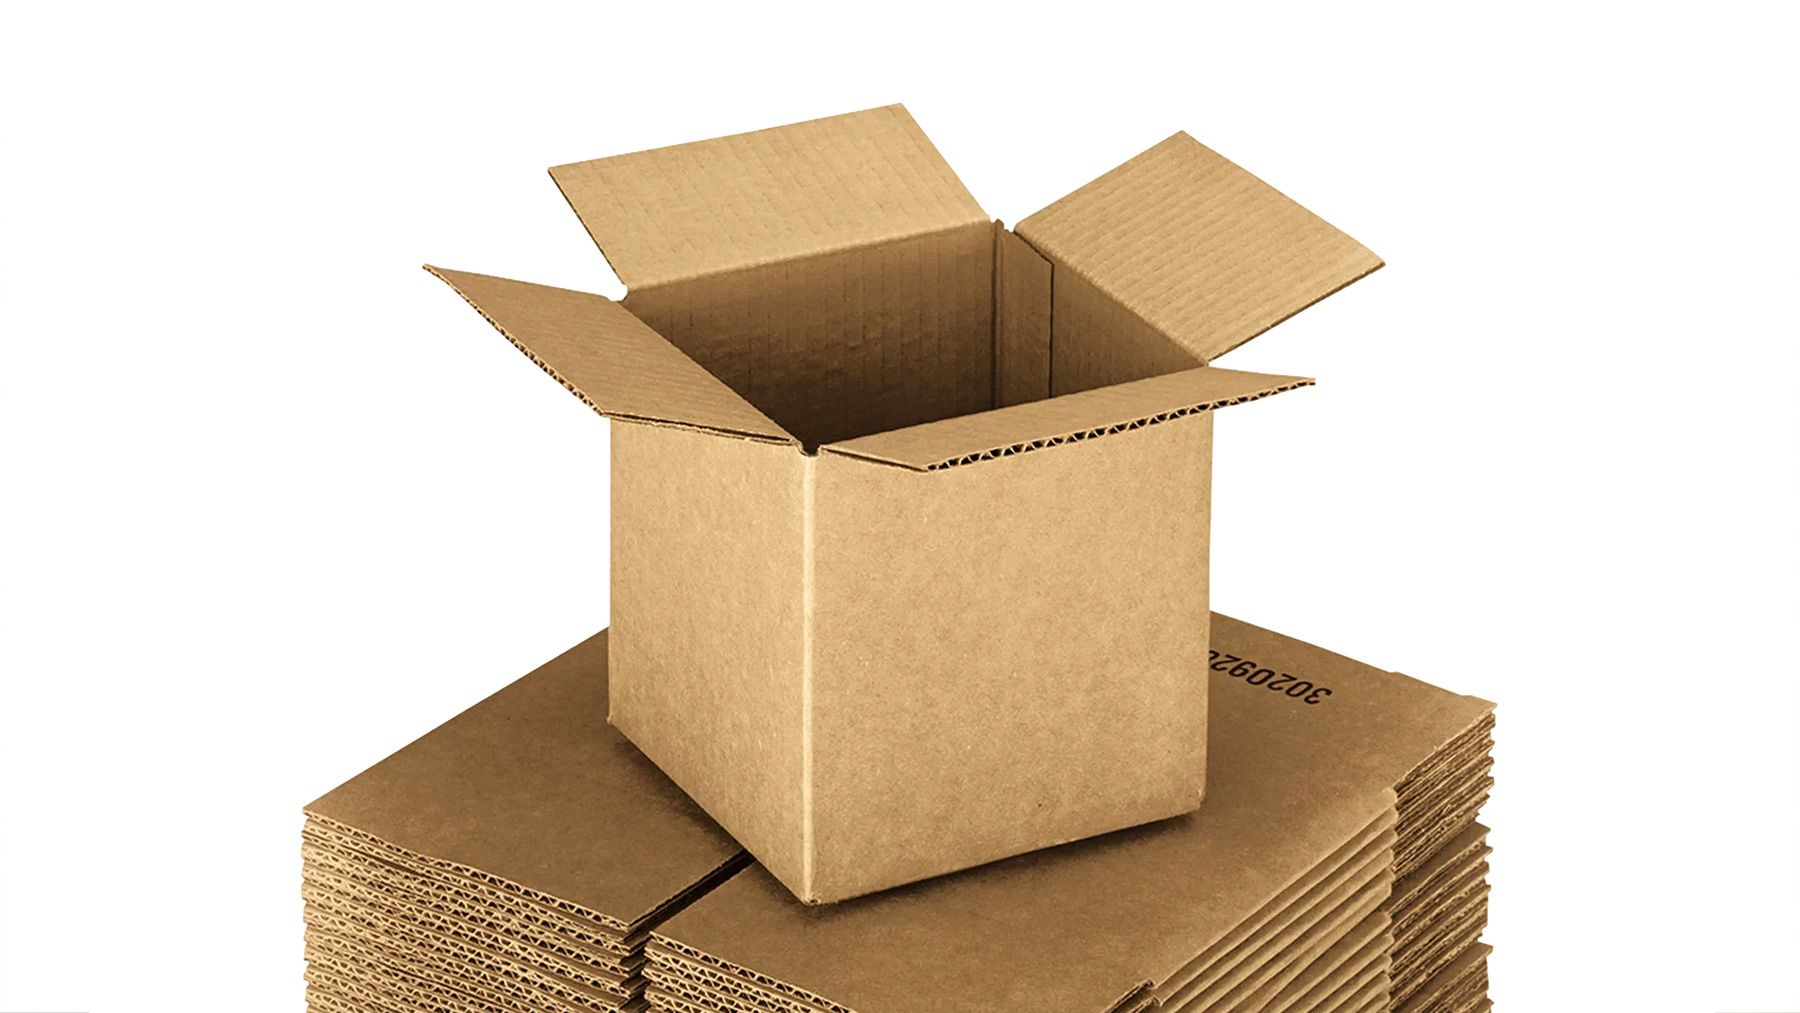 An open cardboard box atop a stack of flattened cardboard boxes.